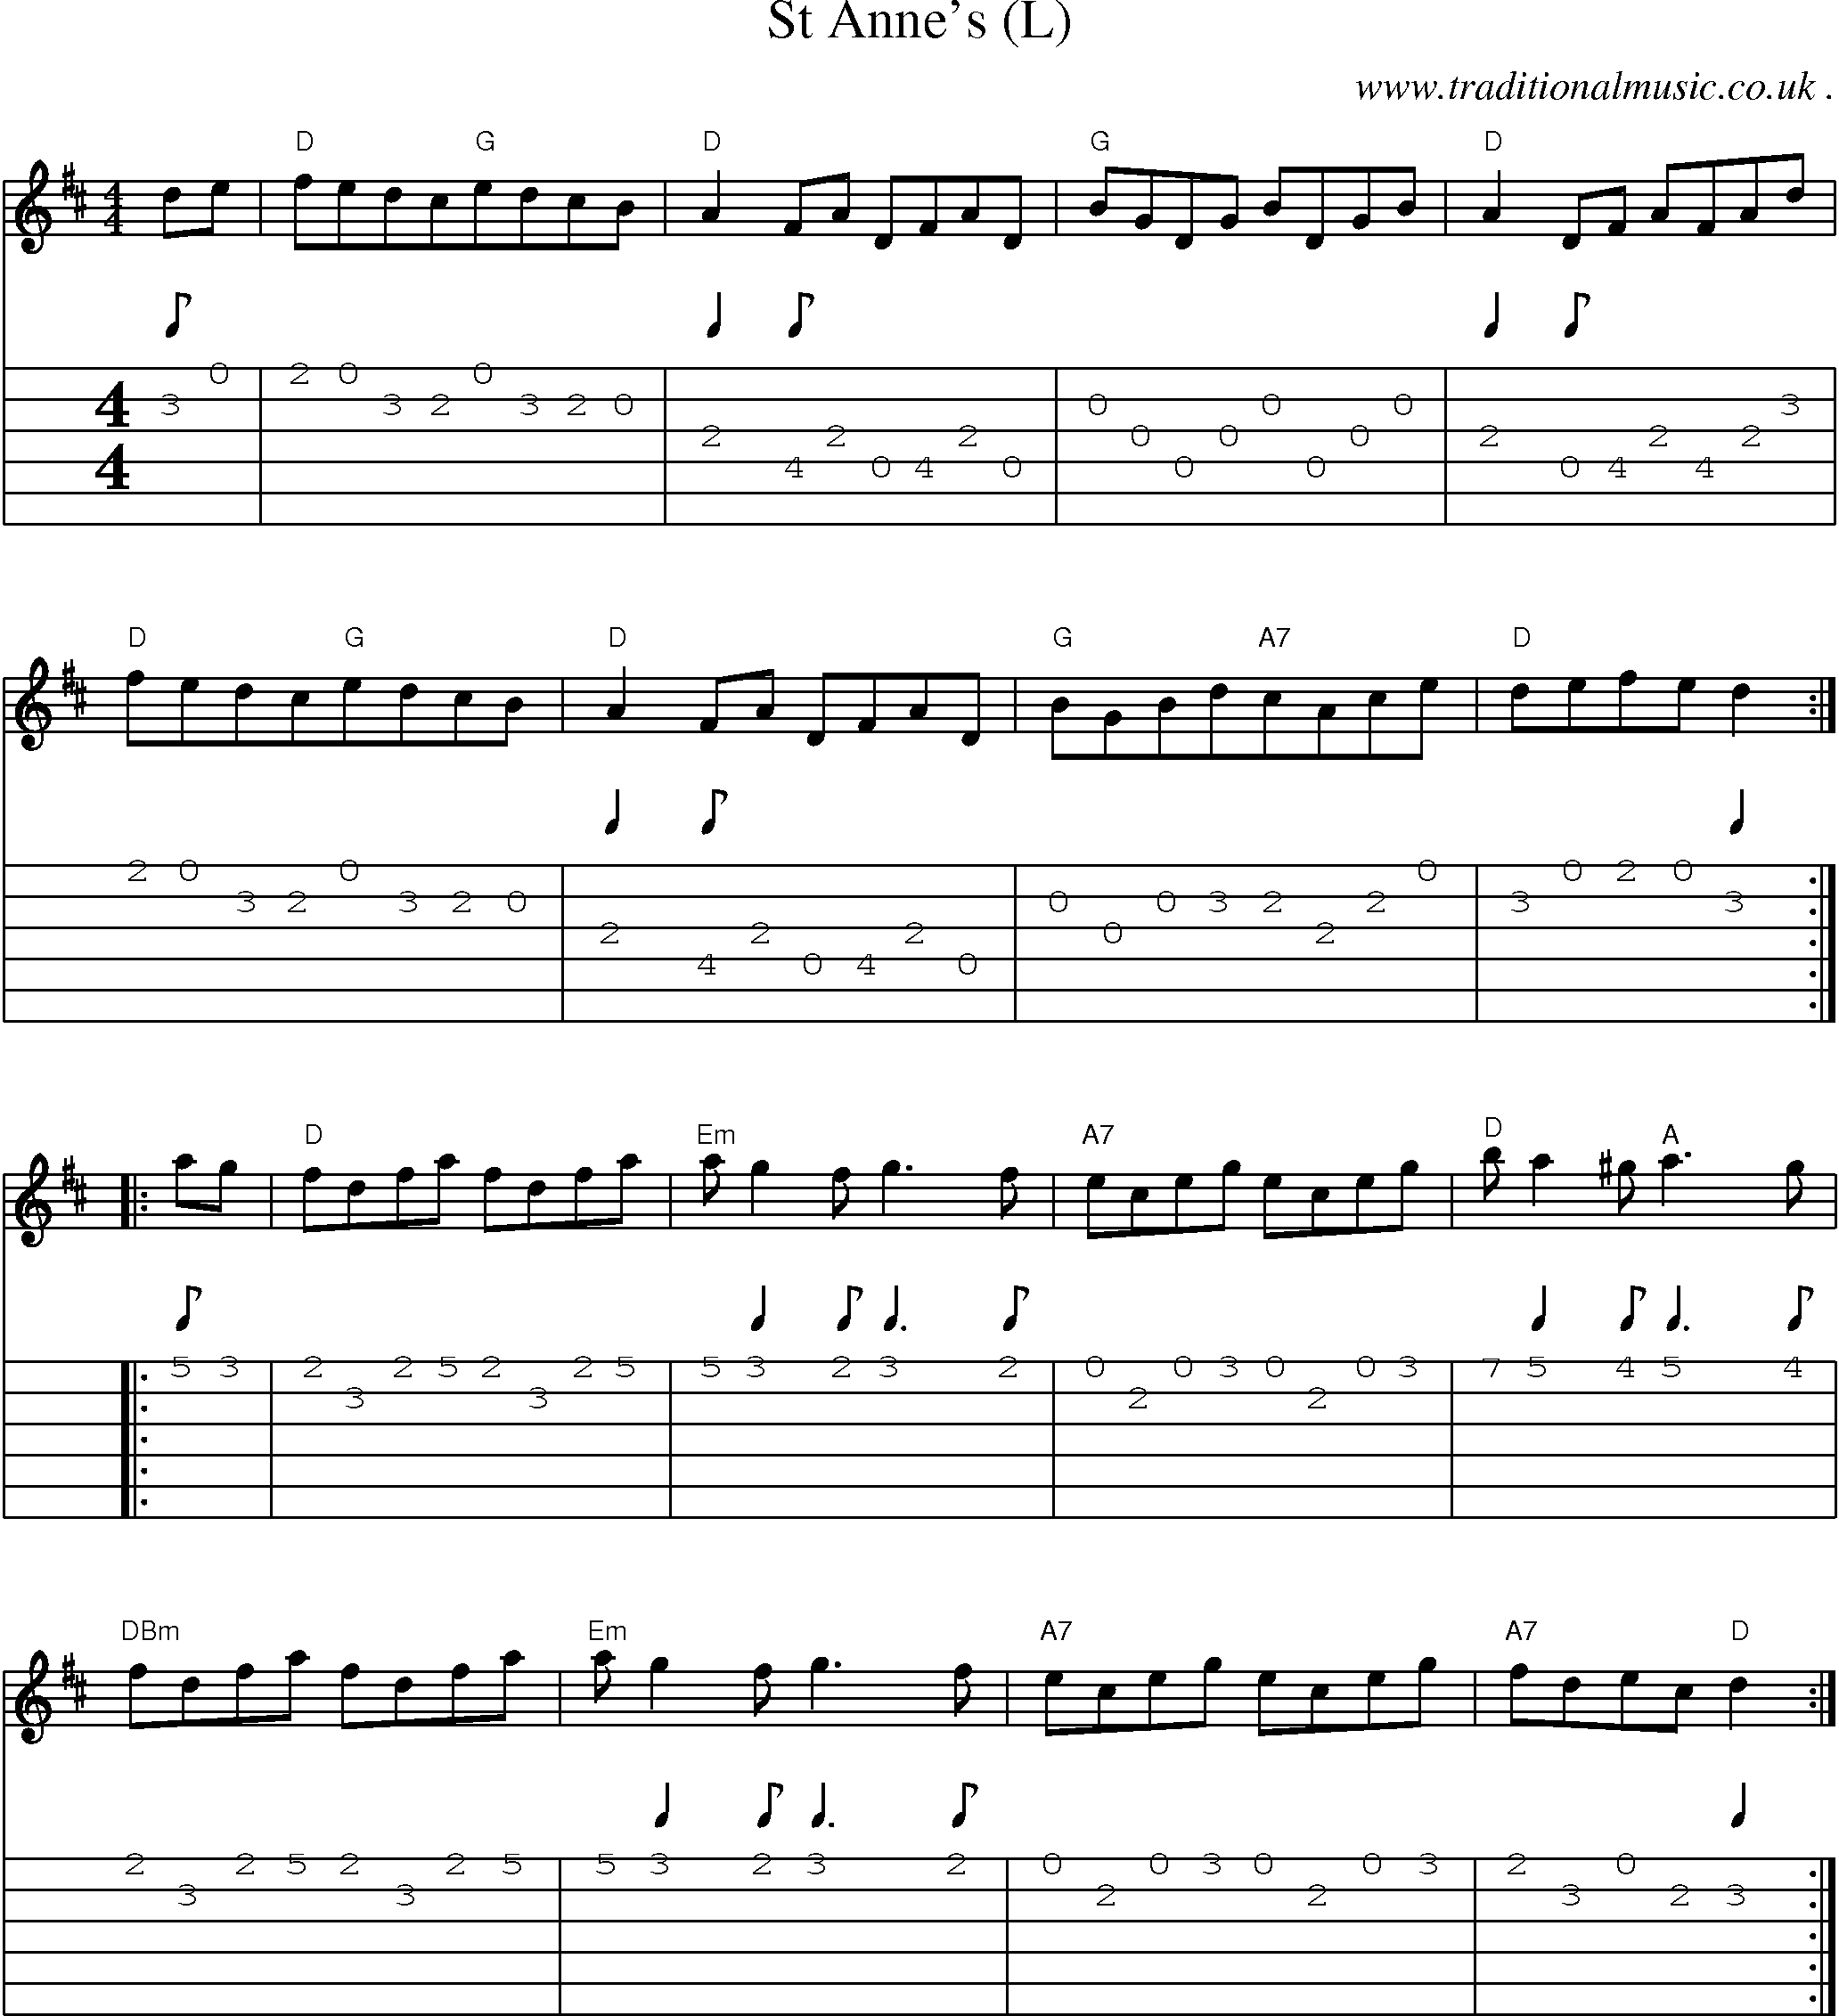 Sheet-Music and Guitar Tabs for St Annes (l)